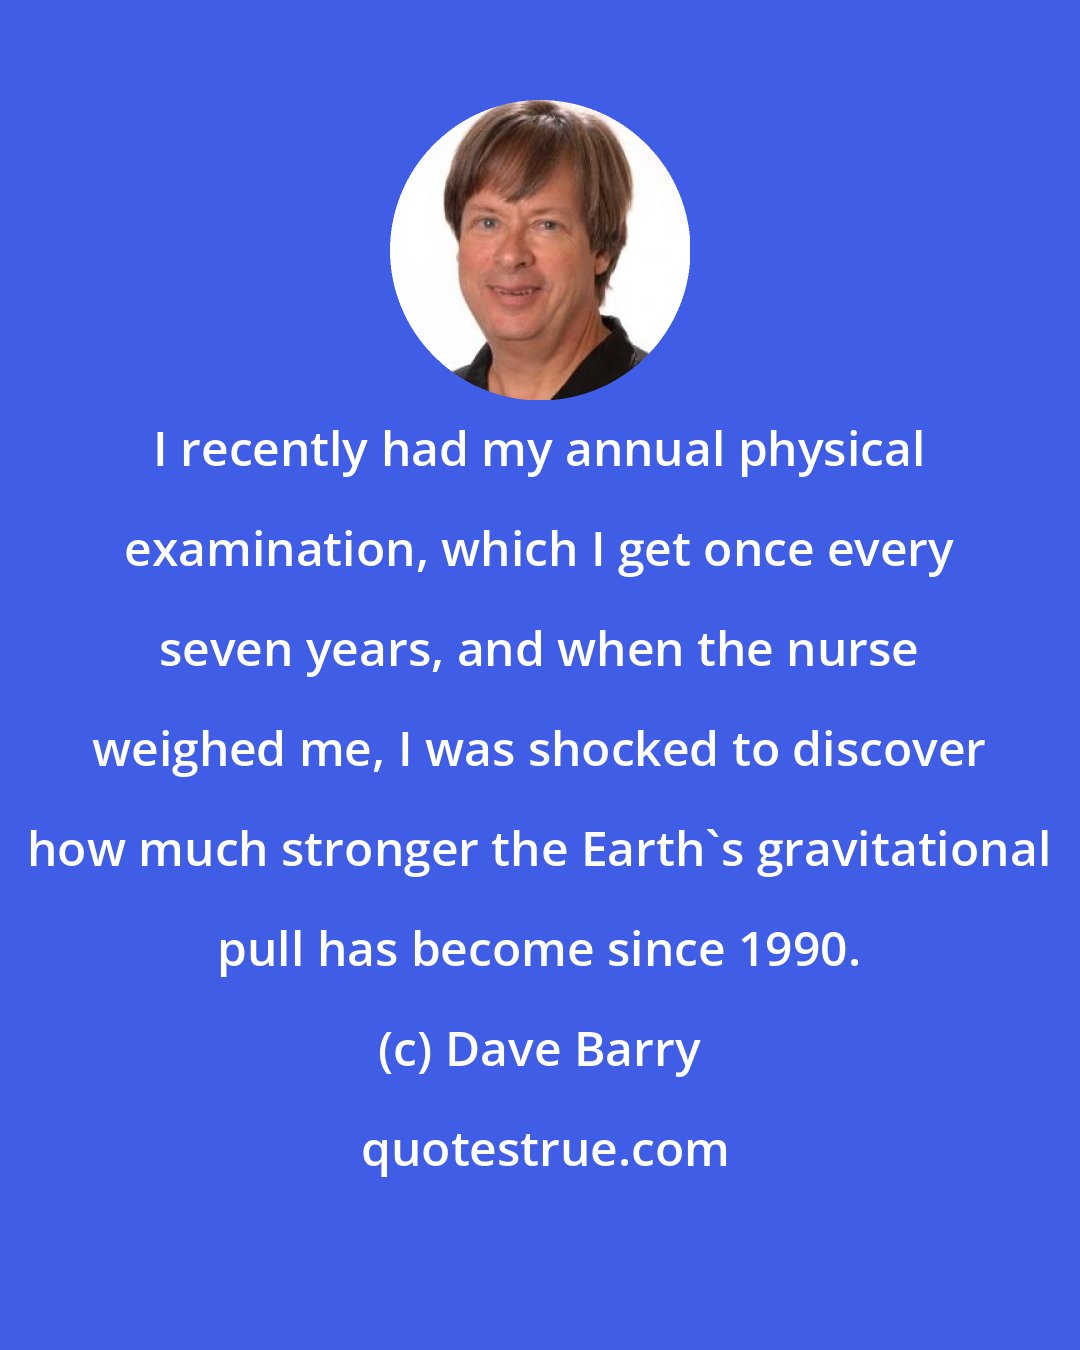 Dave Barry: I recently had my annual physical examination, which I get once every seven years, and when the nurse weighed me, I was shocked to discover how much stronger the Earth's gravitational pull has become since 1990.